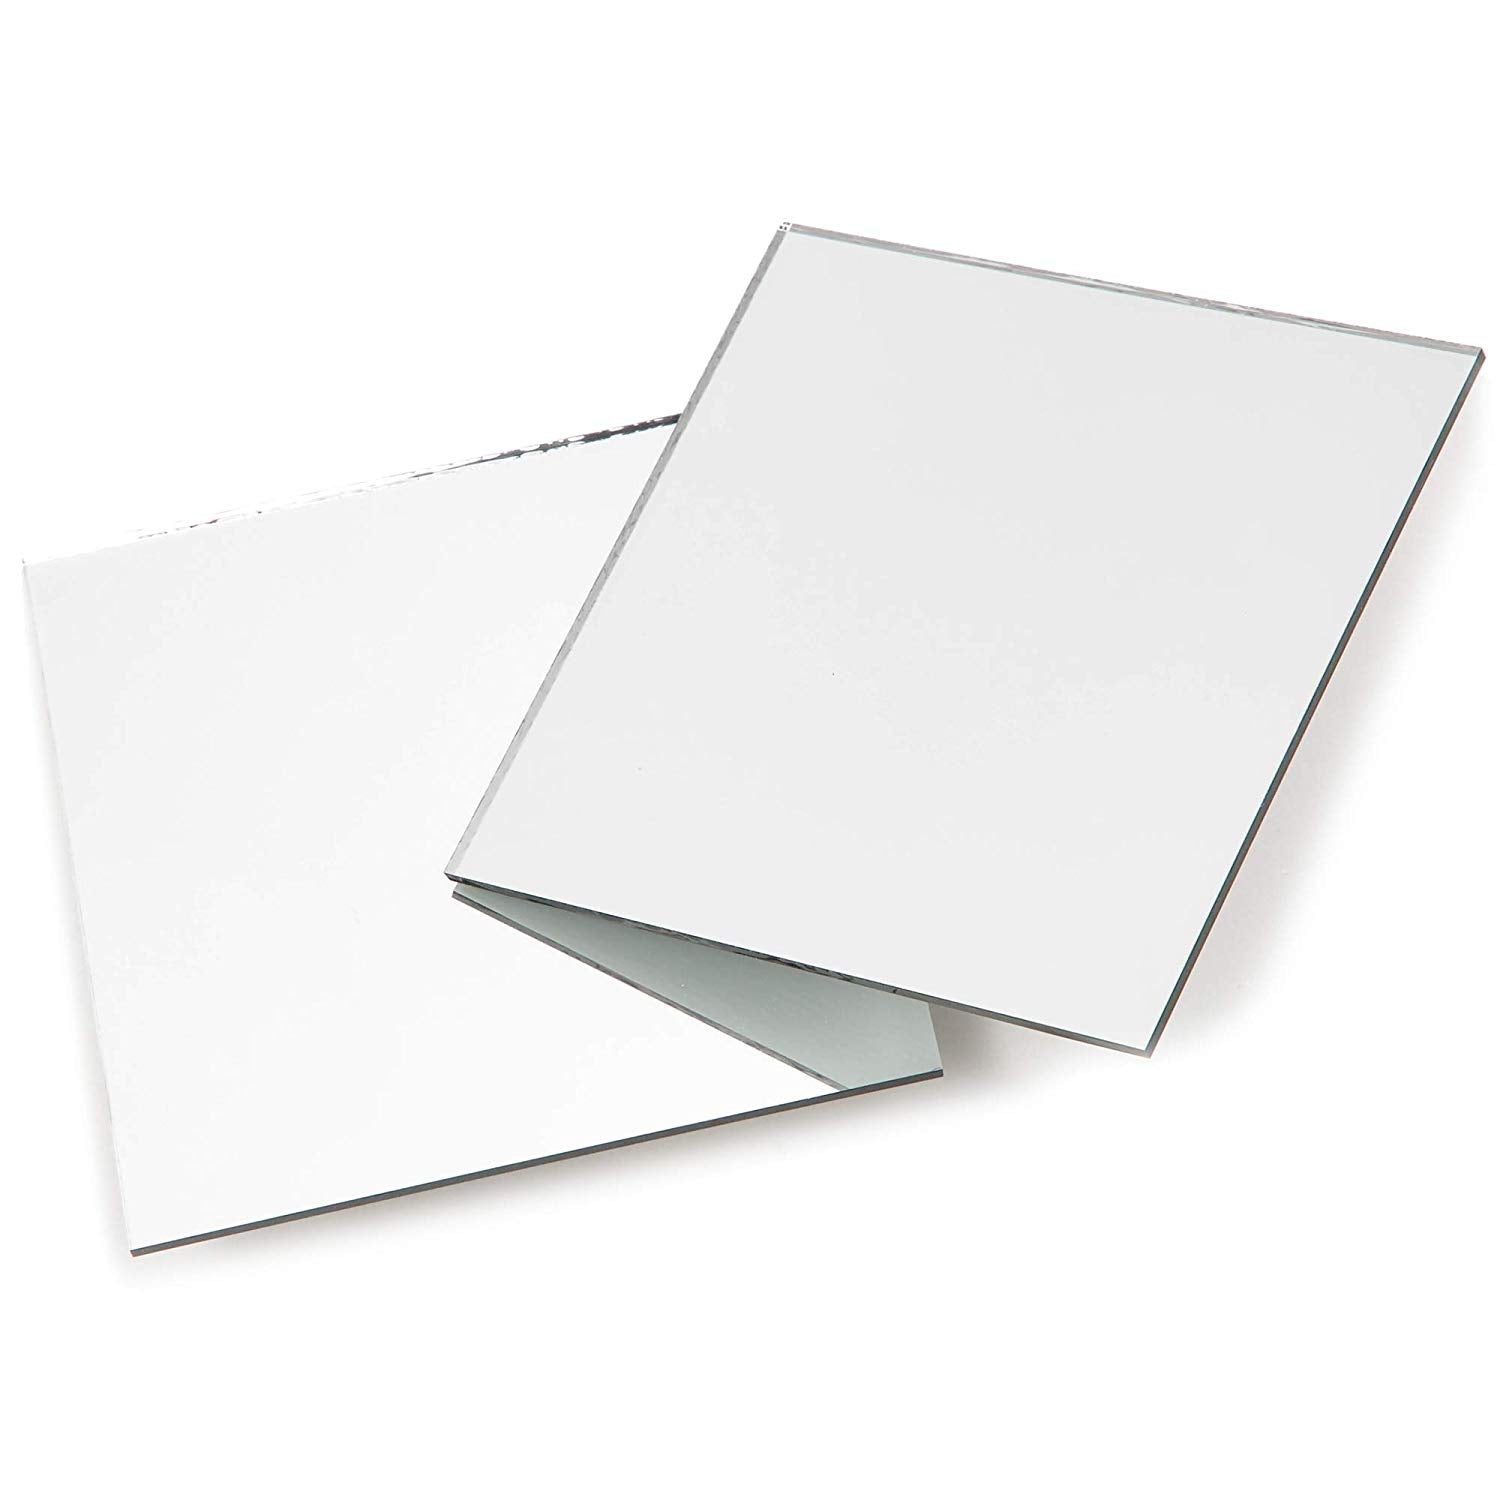 Decorative Square Mirror Tiles for Crafts - Set of 120